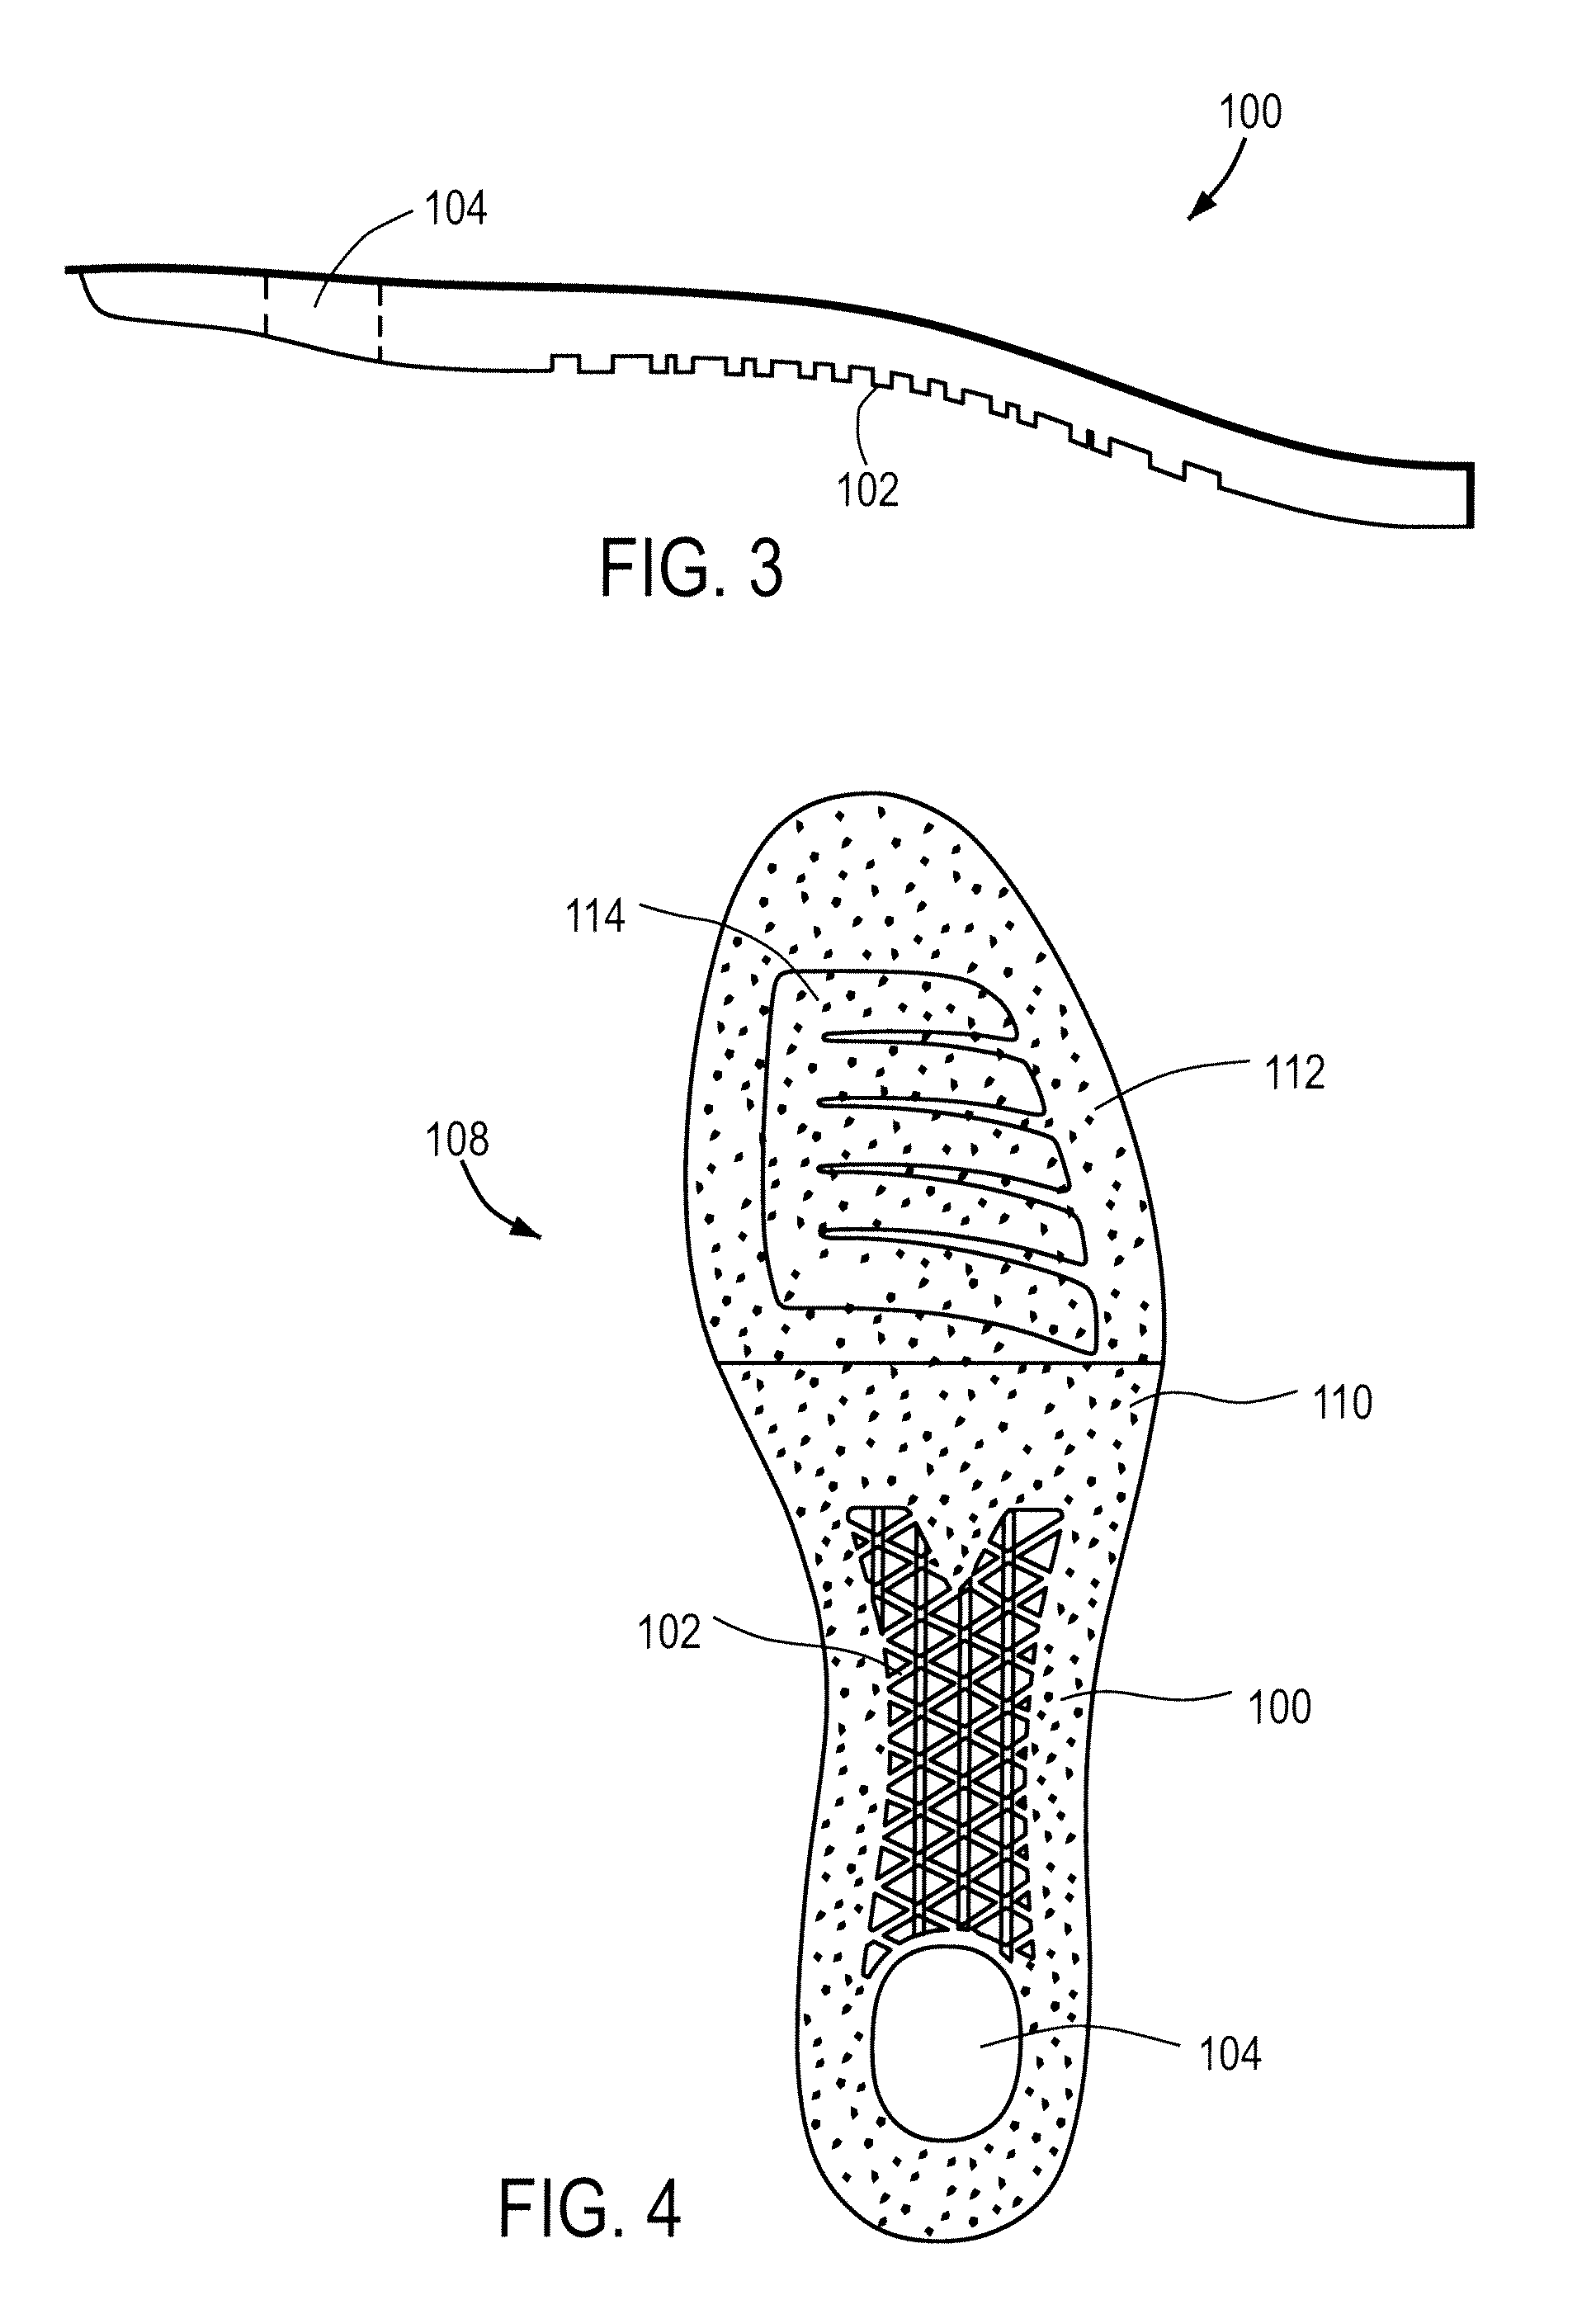 Footwear Sole with Honeycomb Reinforcement Shank, Fabric Layer, and Polymer Components